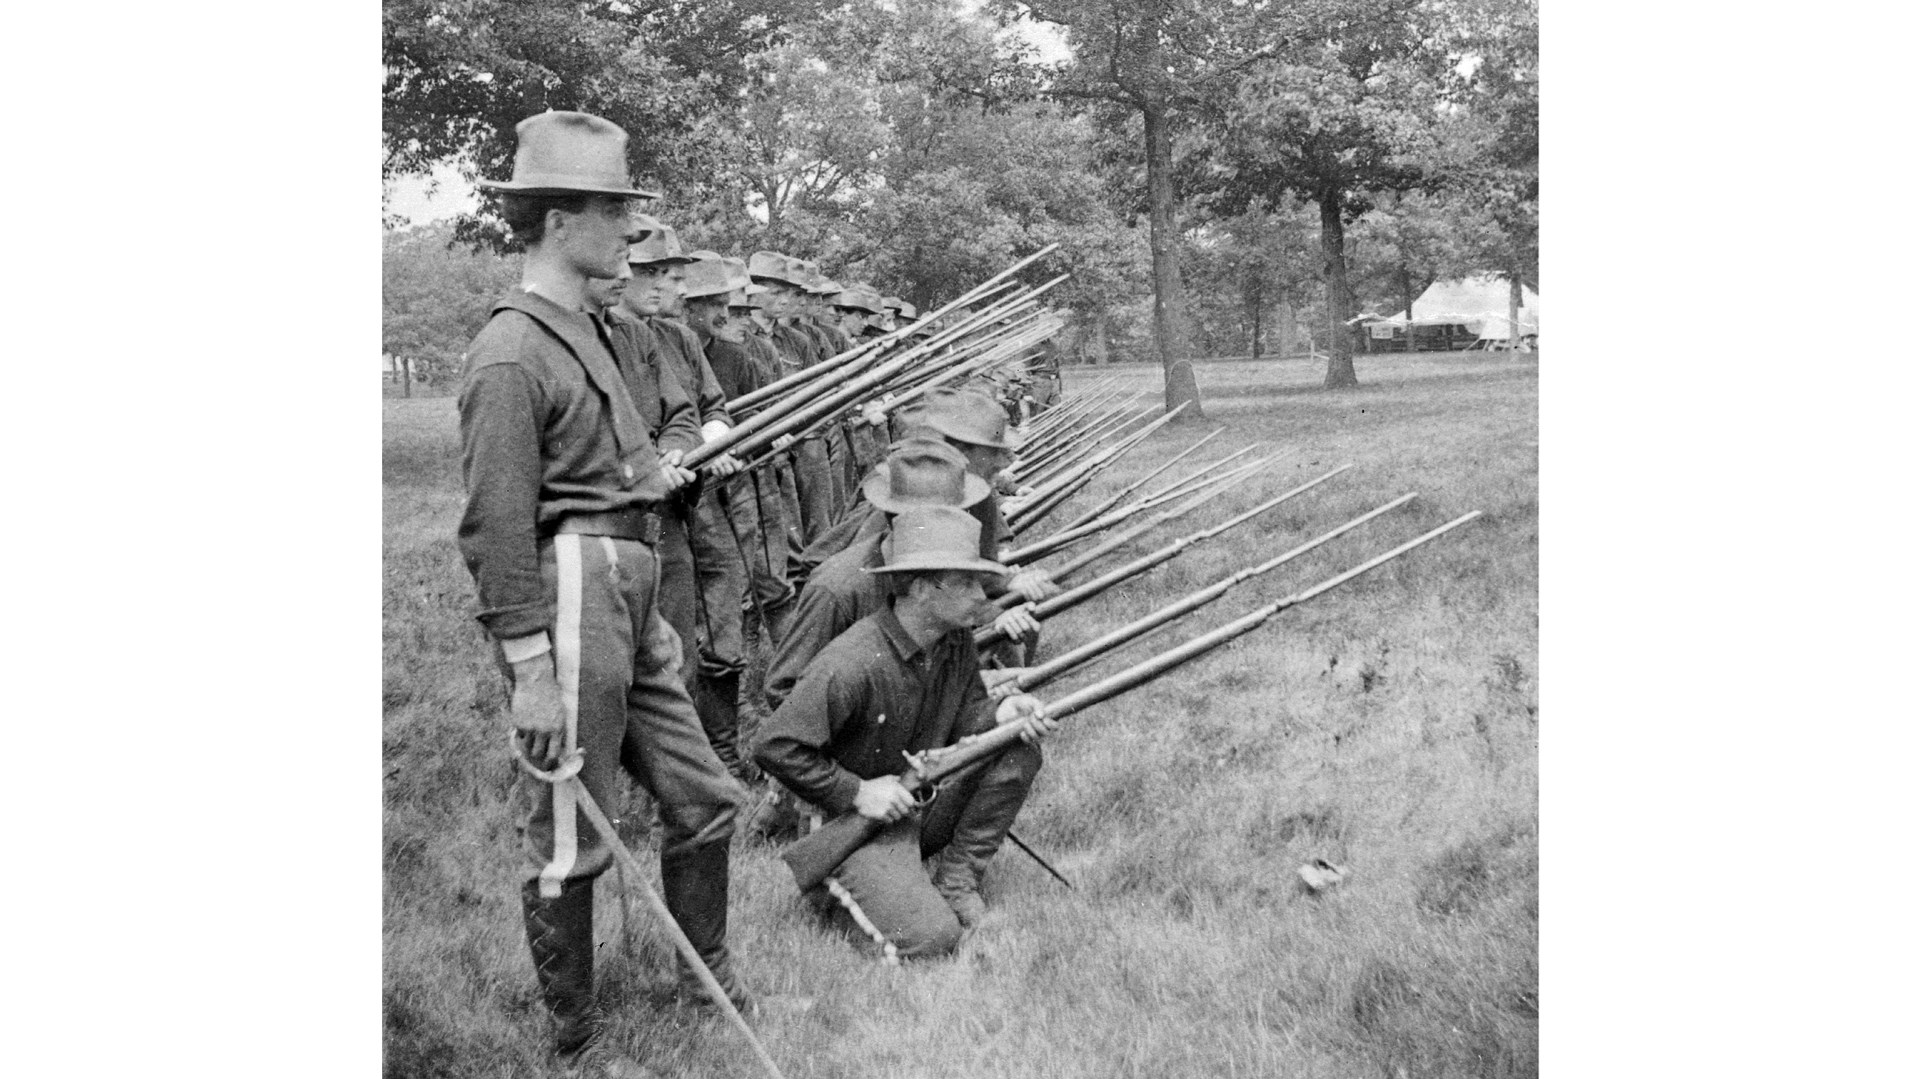 1st Illinois Volunteer infantry with Trapdoor Springfield rifles and bayonets, Spanish-American War. Courtesy of Tom Laemlein.